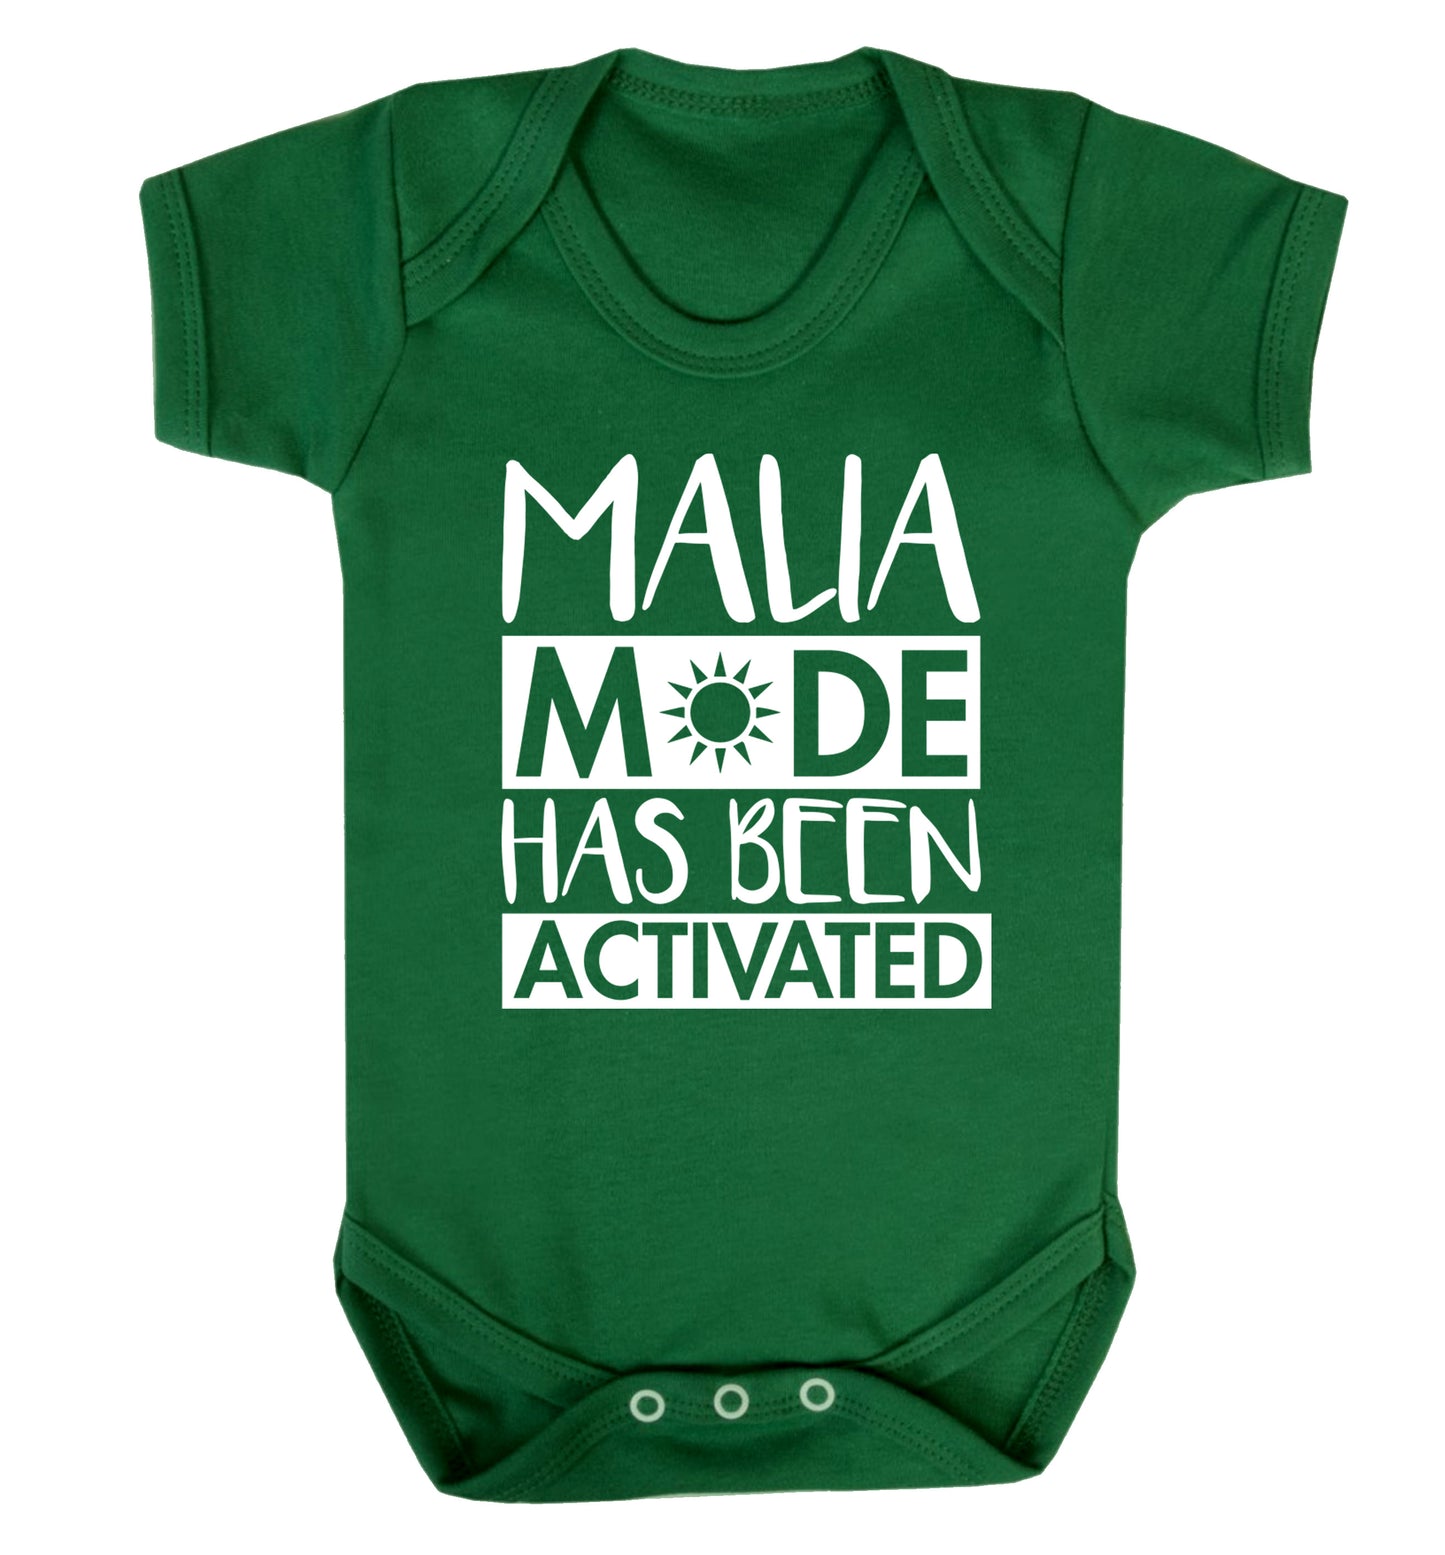 Malia mode has been activated Baby Vest green 18-24 months